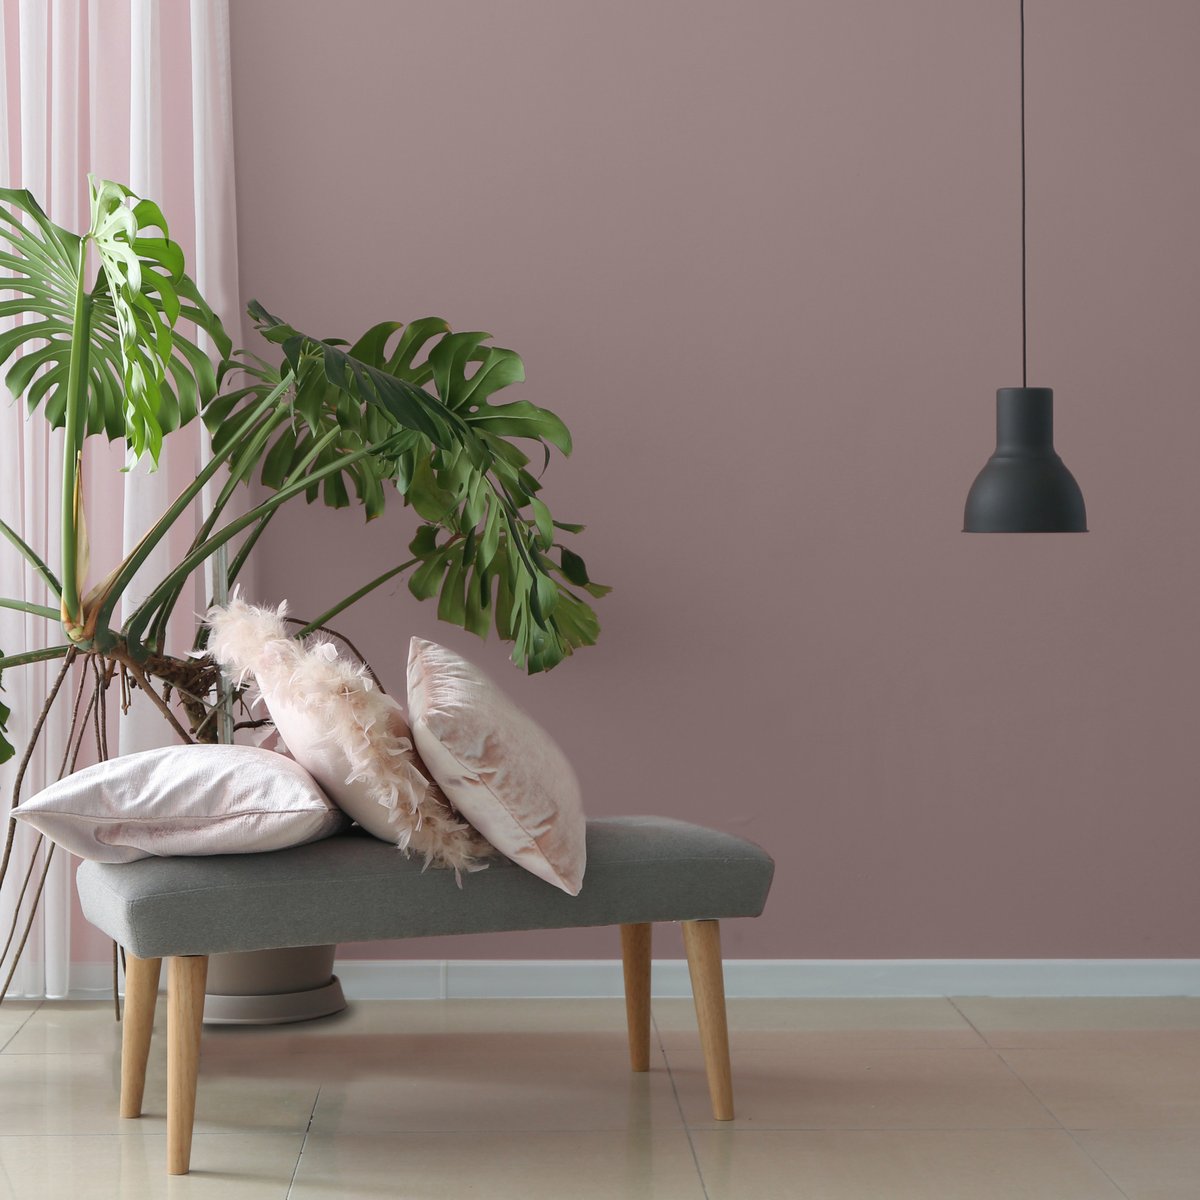 Colourtrend Mallow Stem | Same Day Dublin and Nationwide Paint in Ireland Delivery by Weirs of Baggot Street - Official Colourtrend Stockist